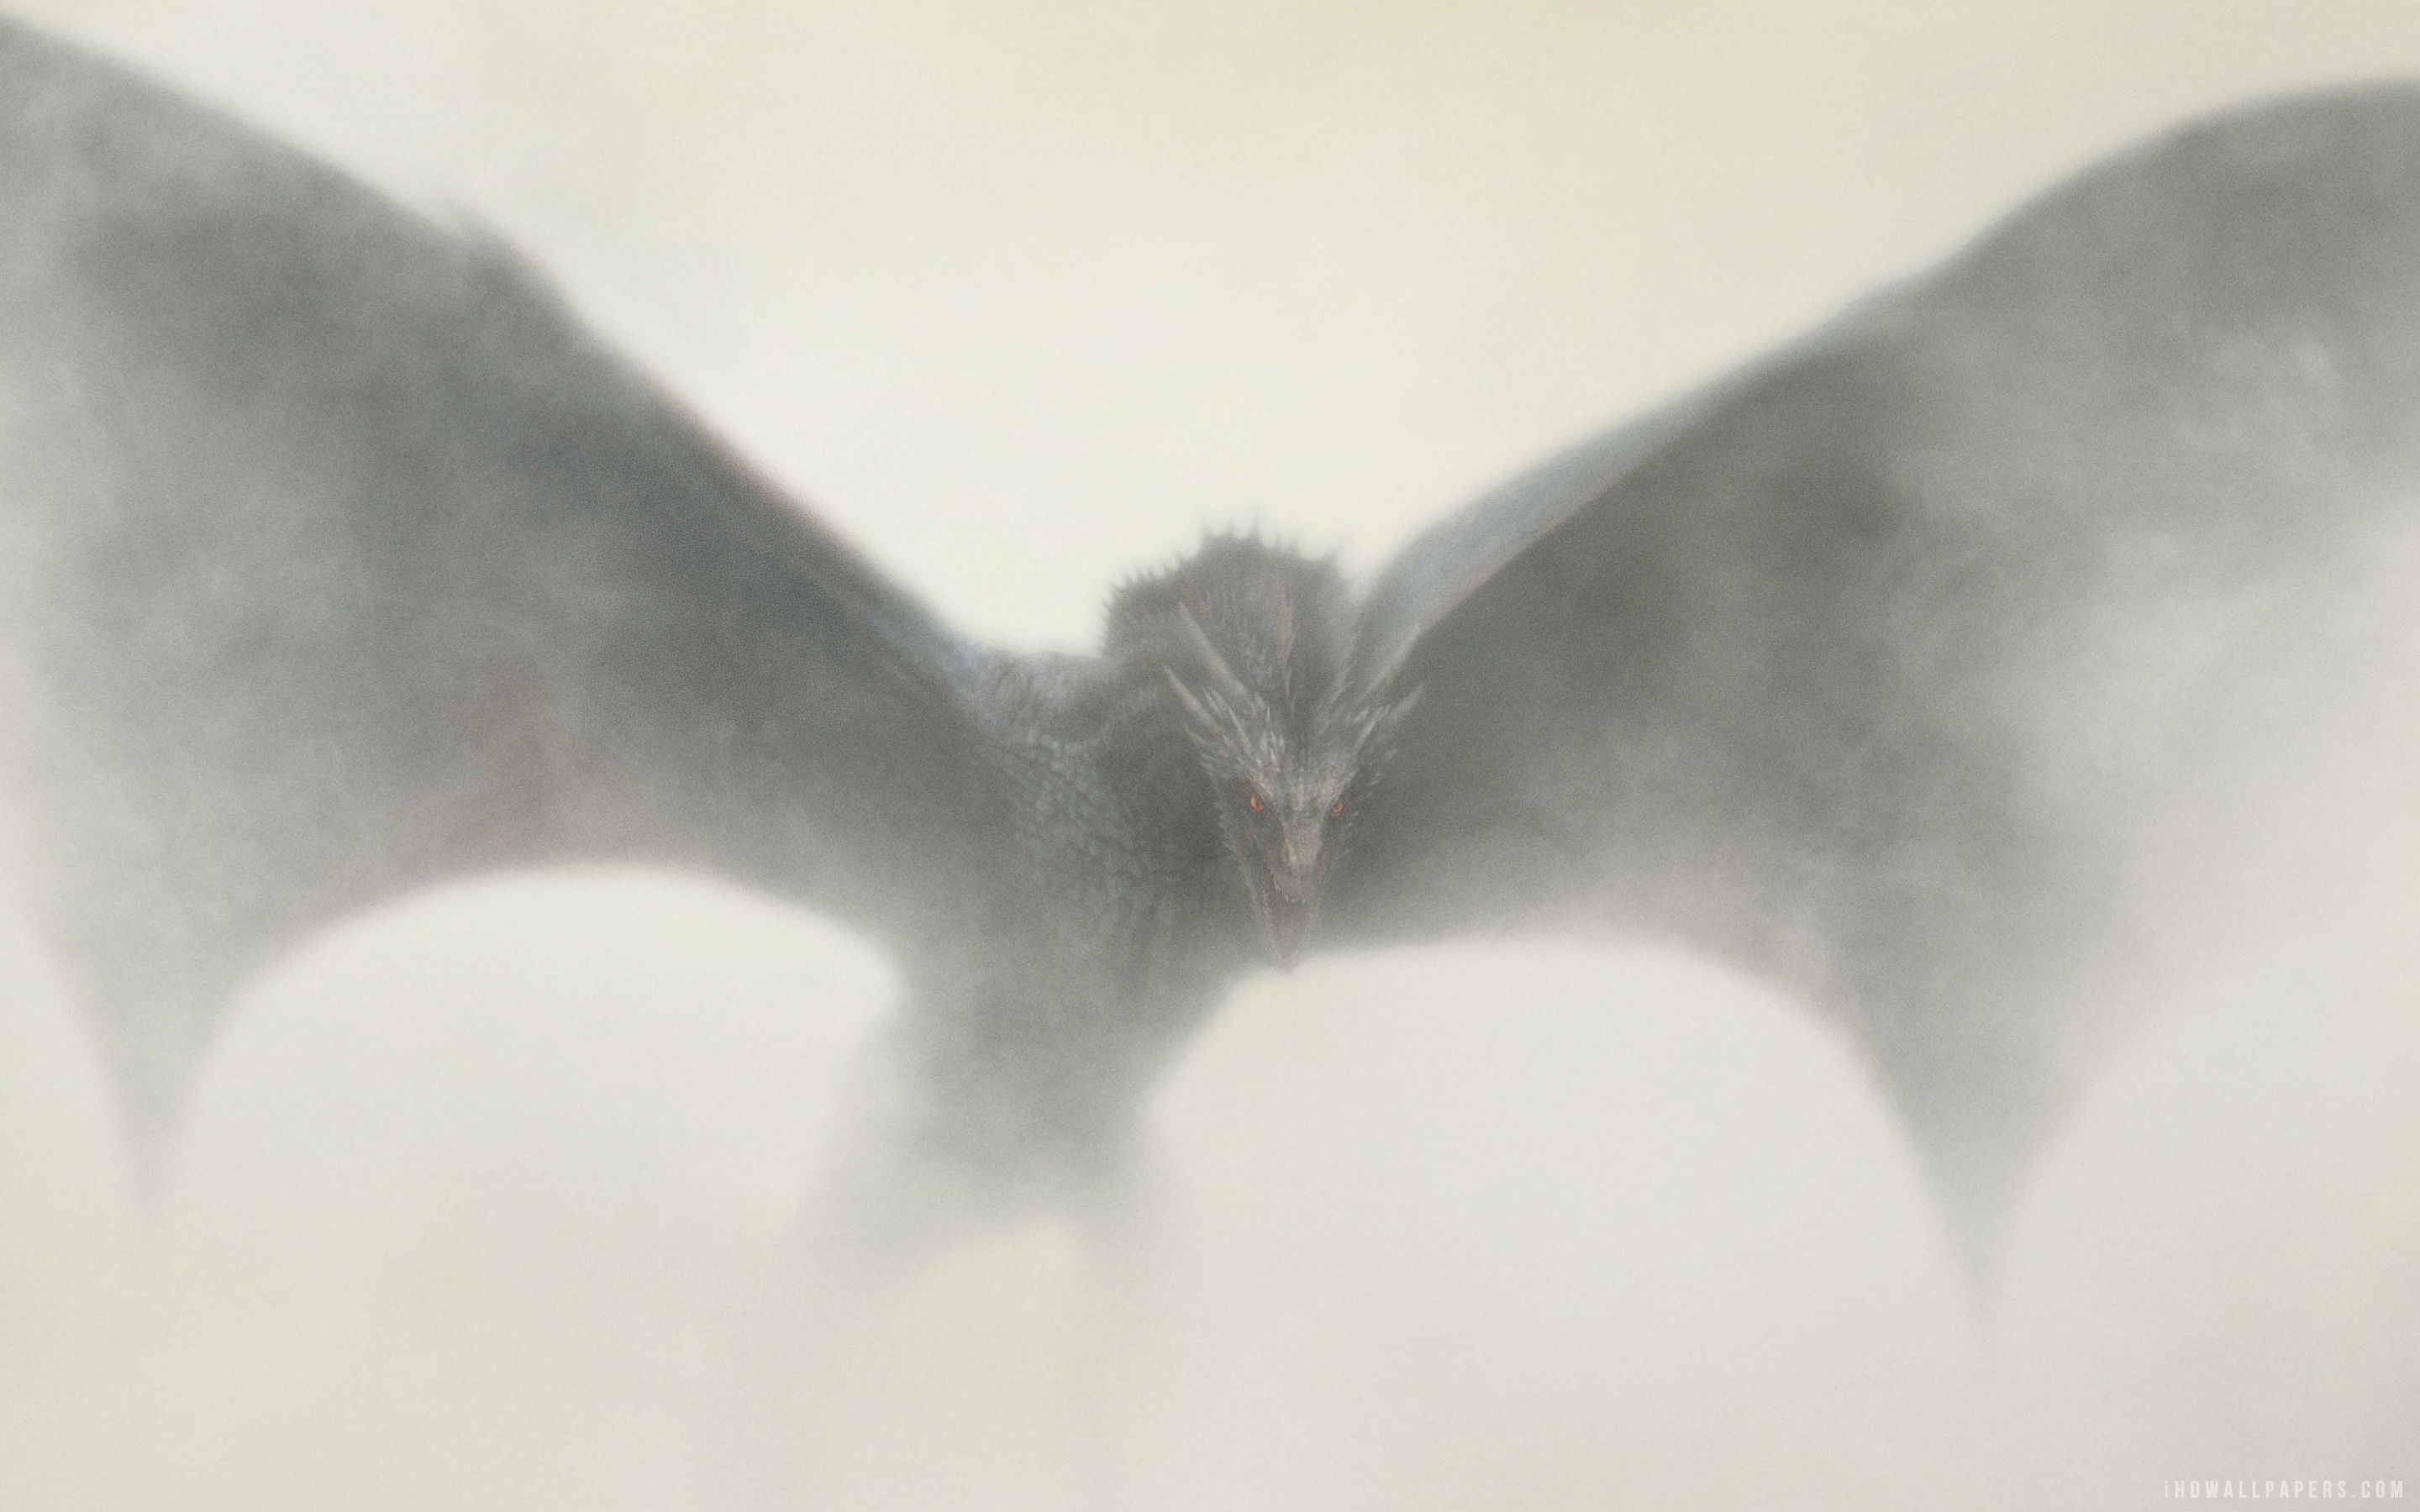 Game Of Thrones Wallpaper 4k For Pc Dragon - HD Wallpaper 